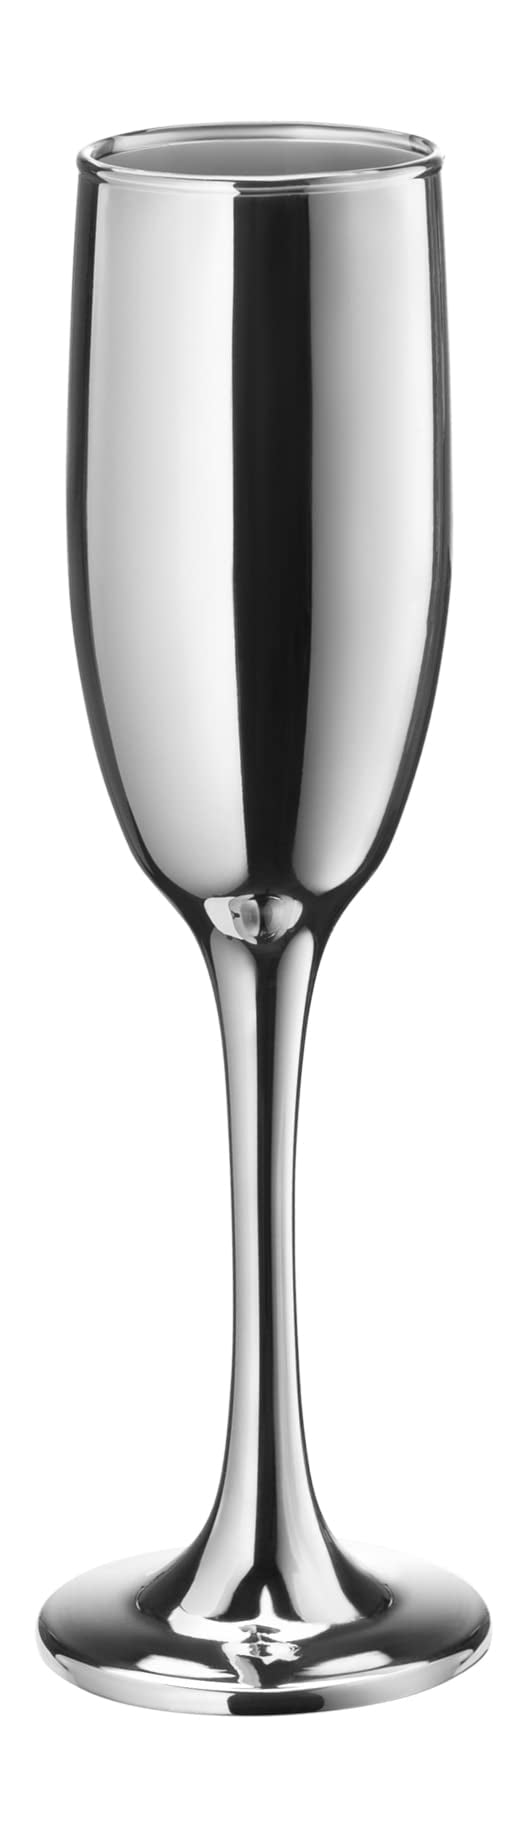 Vikko Décor Rose Gold Champagne Flutes: 6 Ounce Capacity – Perfect